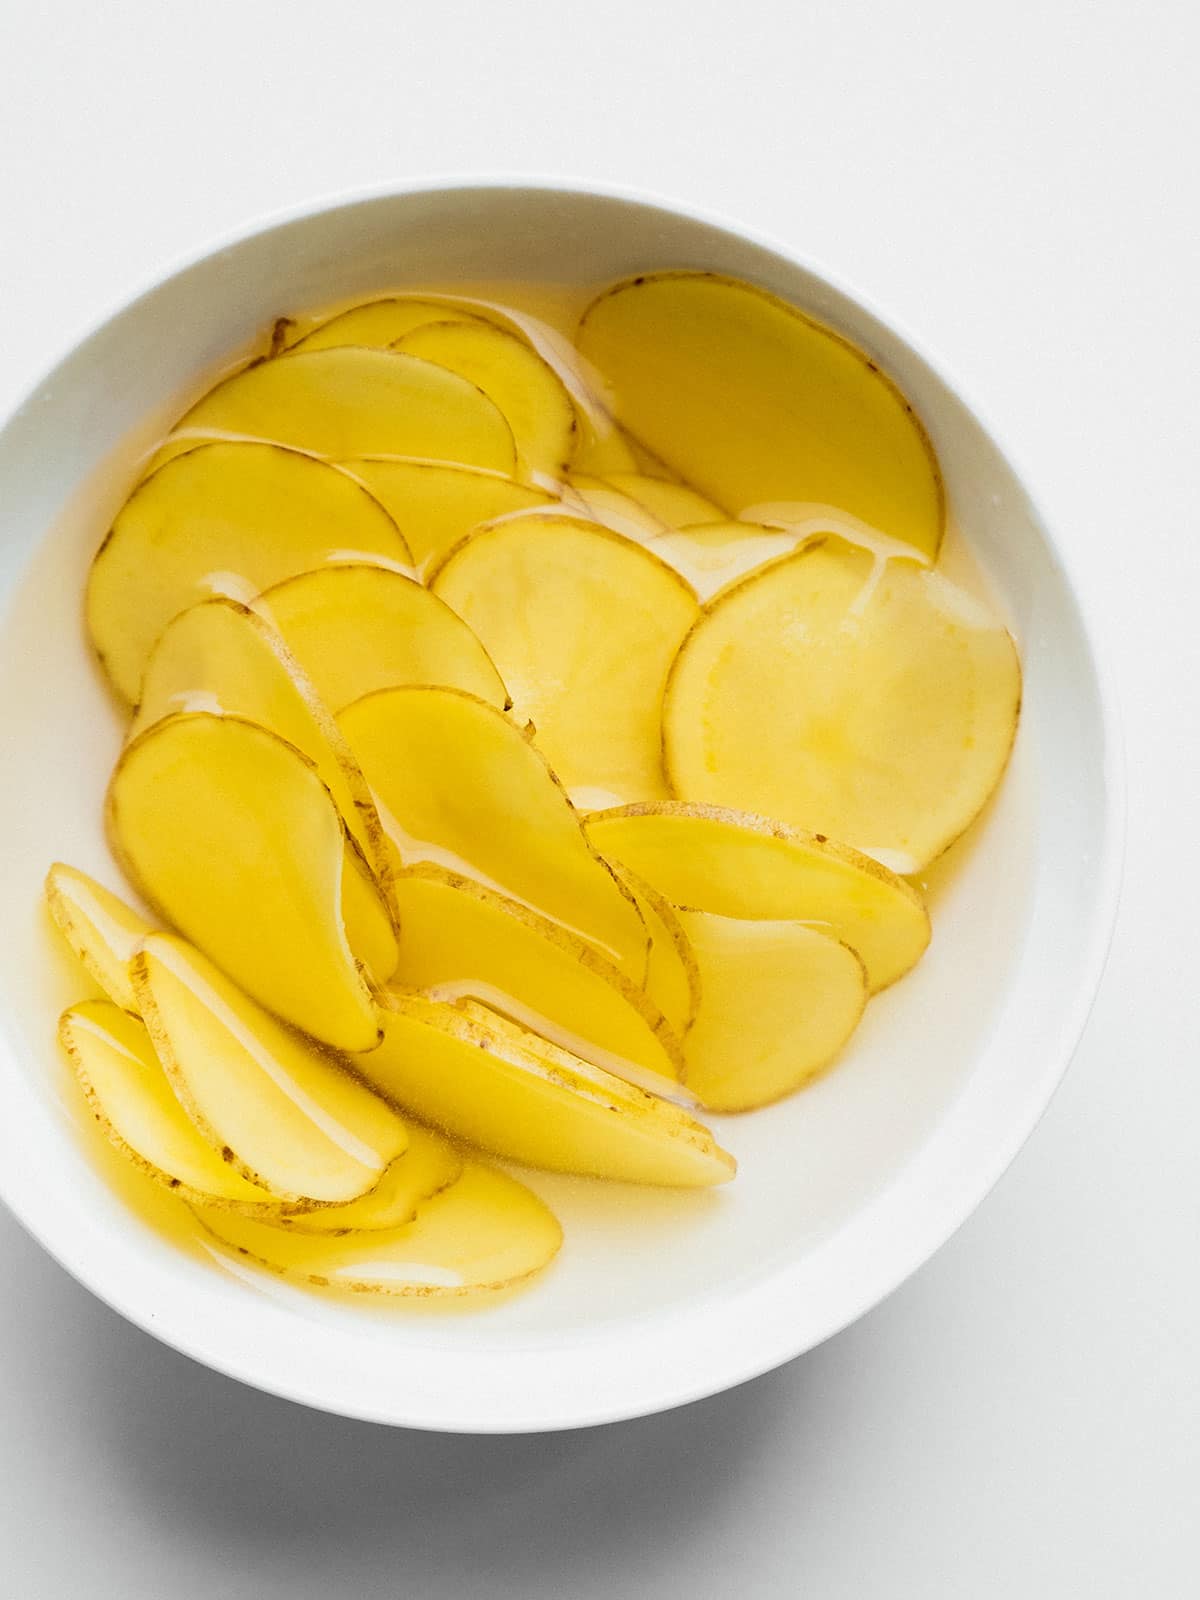 Soaking potato chips before cooking.